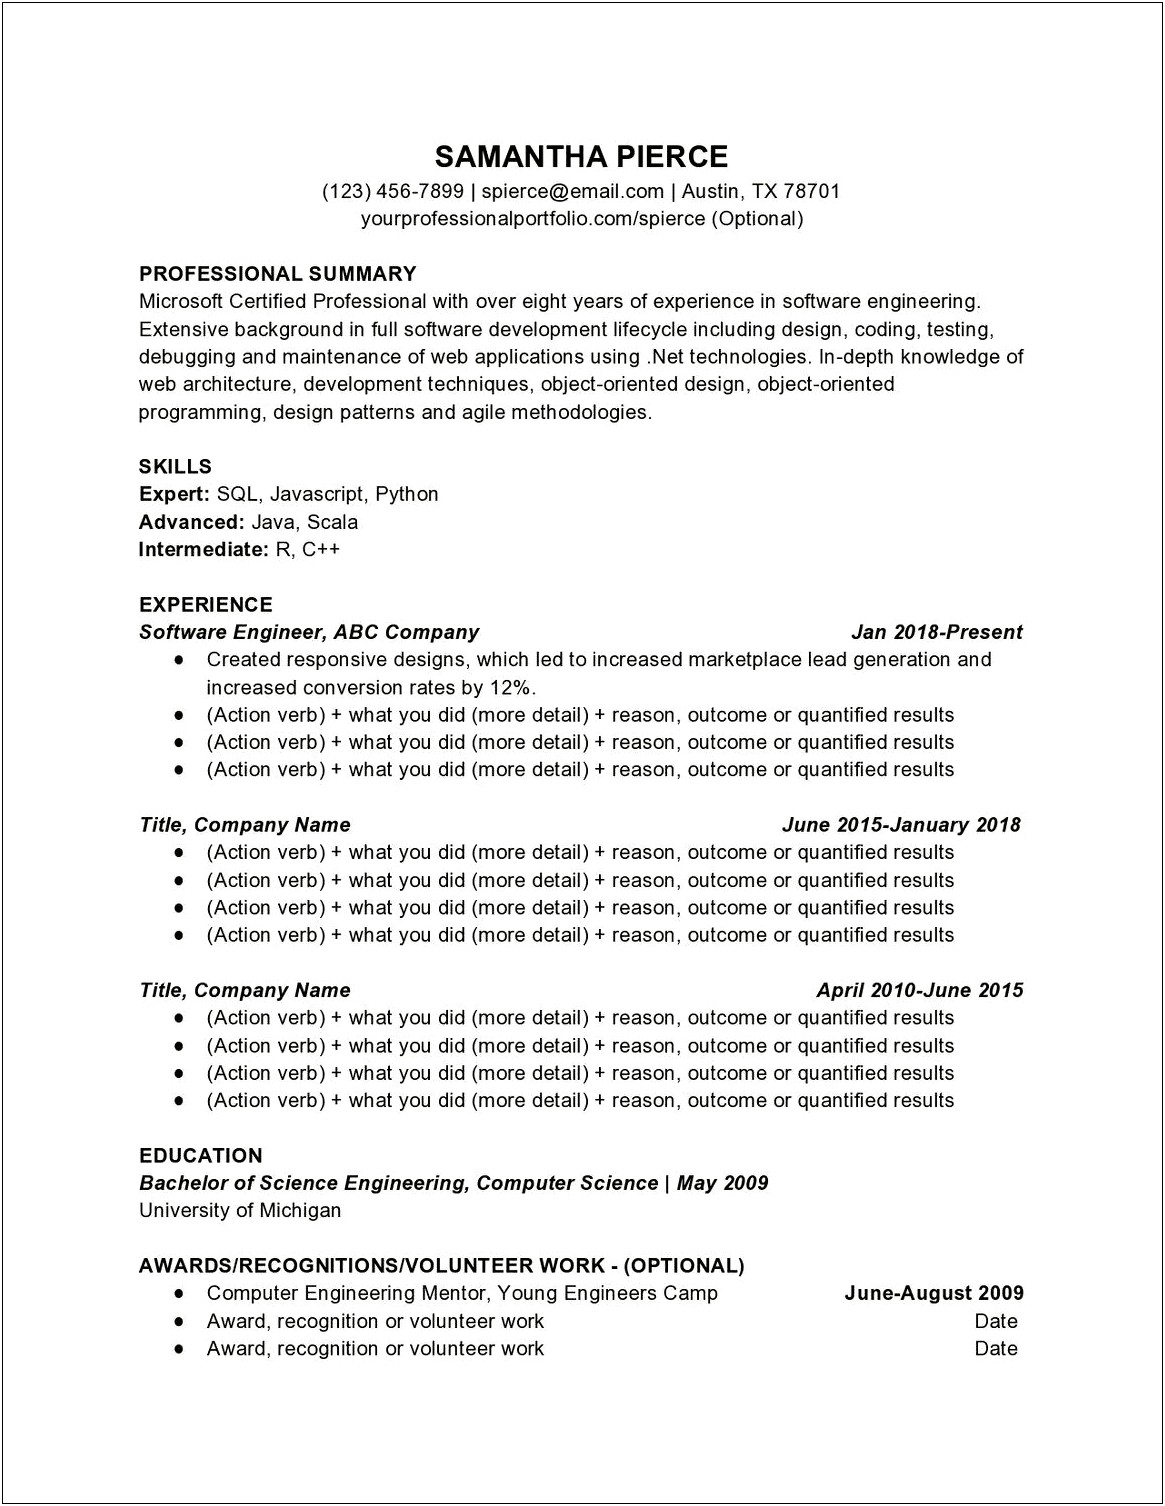 Resume Objective Experienced Software Engineer